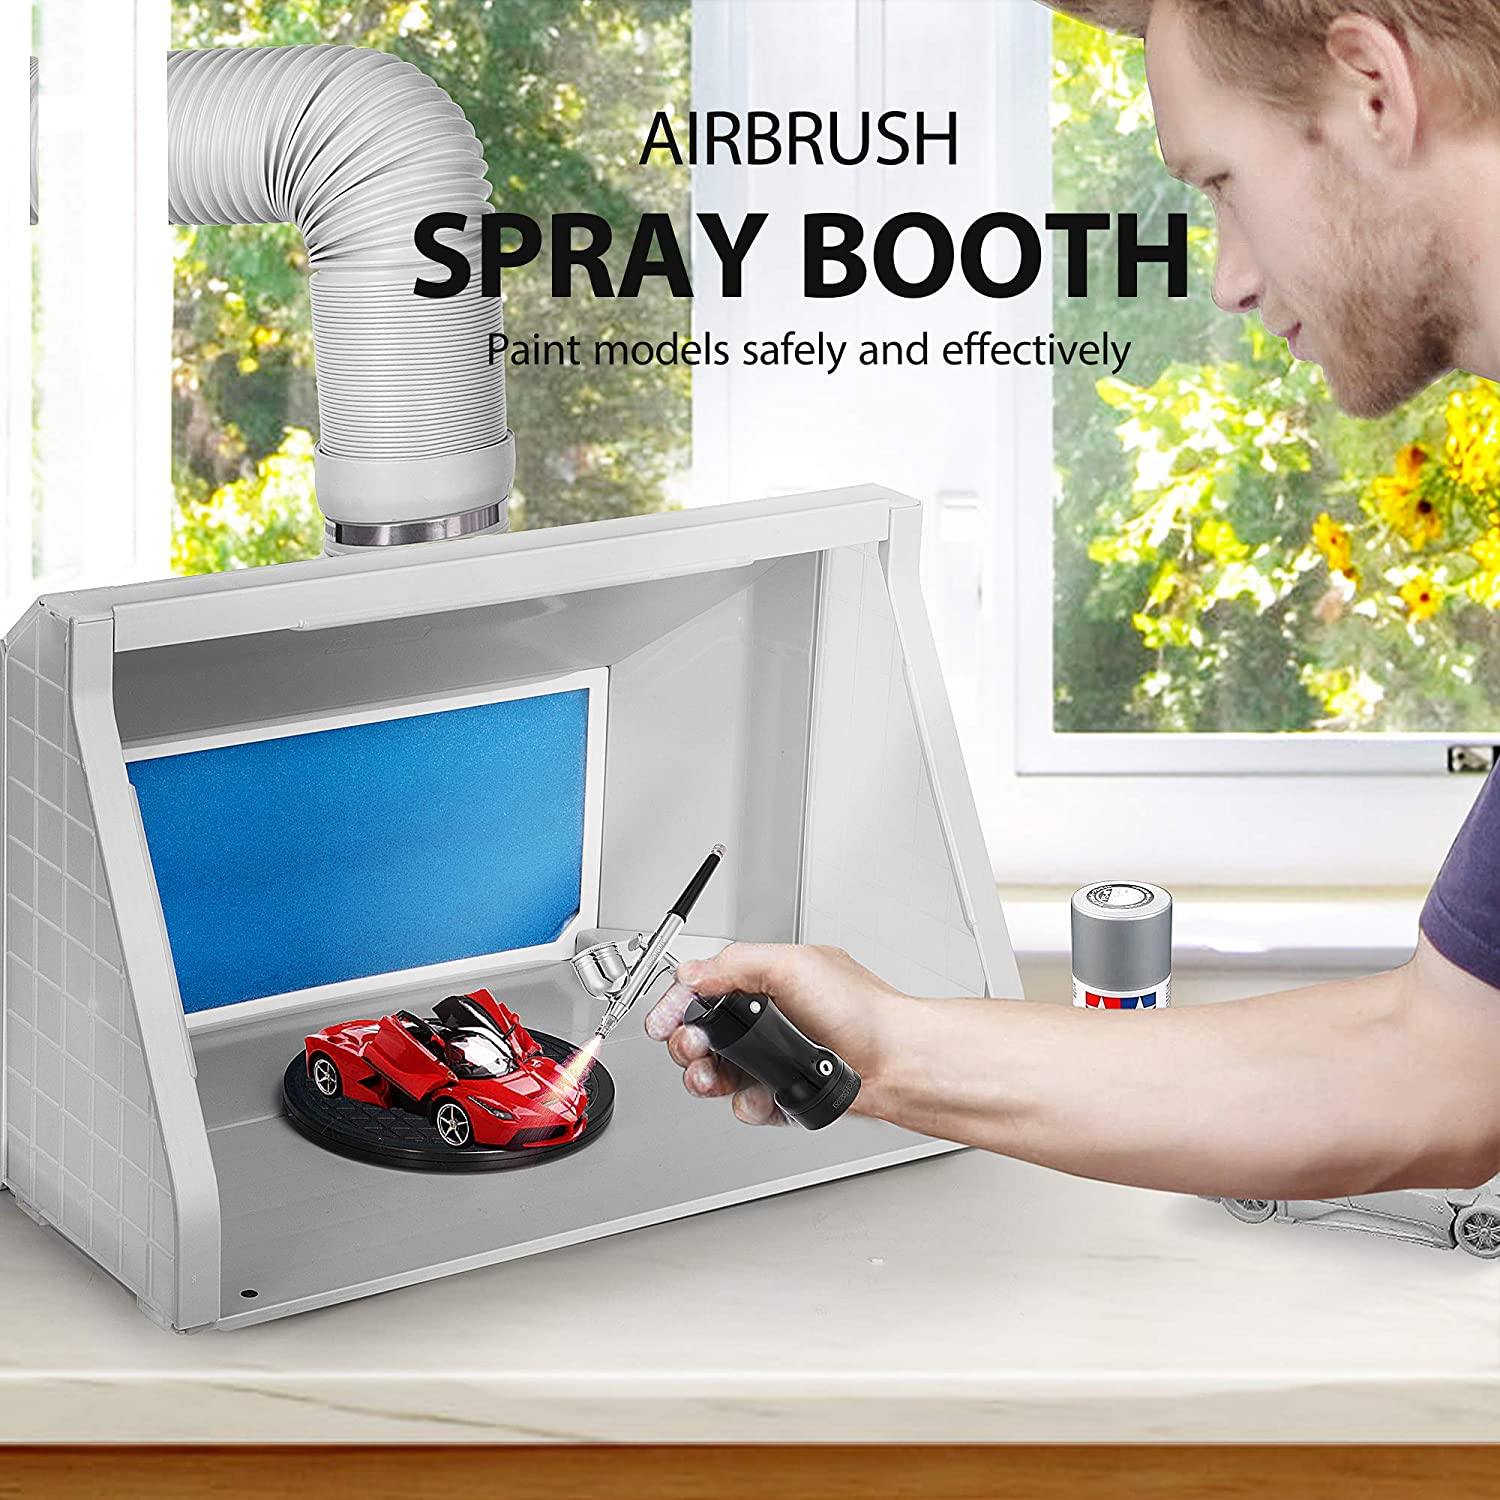 Airbrush paint booth